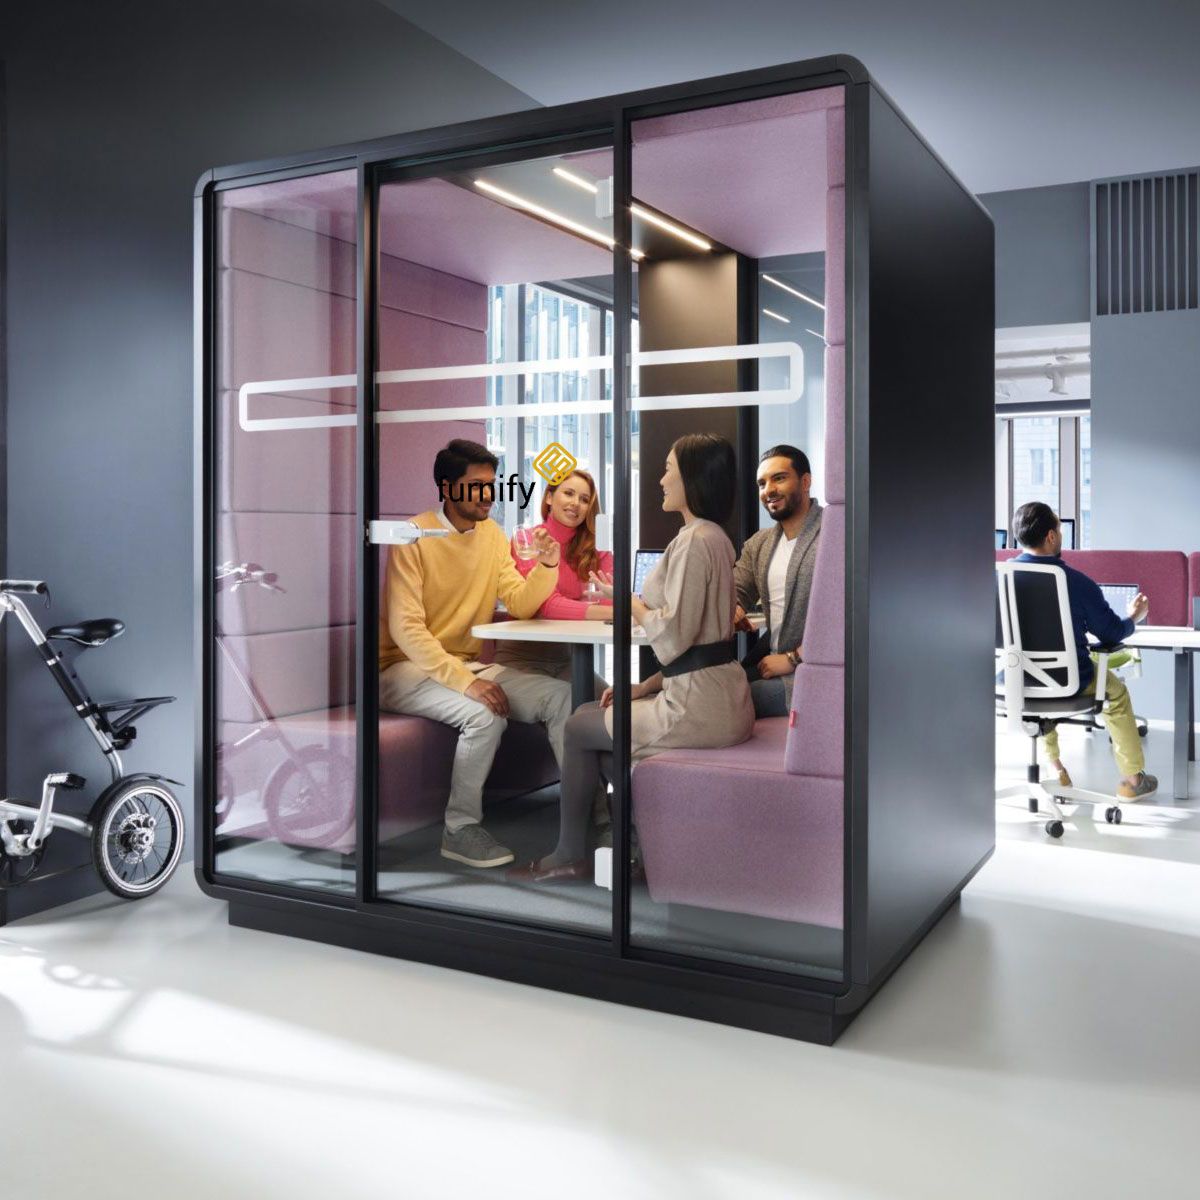 Campers&Dens are office Pods that bring the intuition of the great outdoors into the workplace